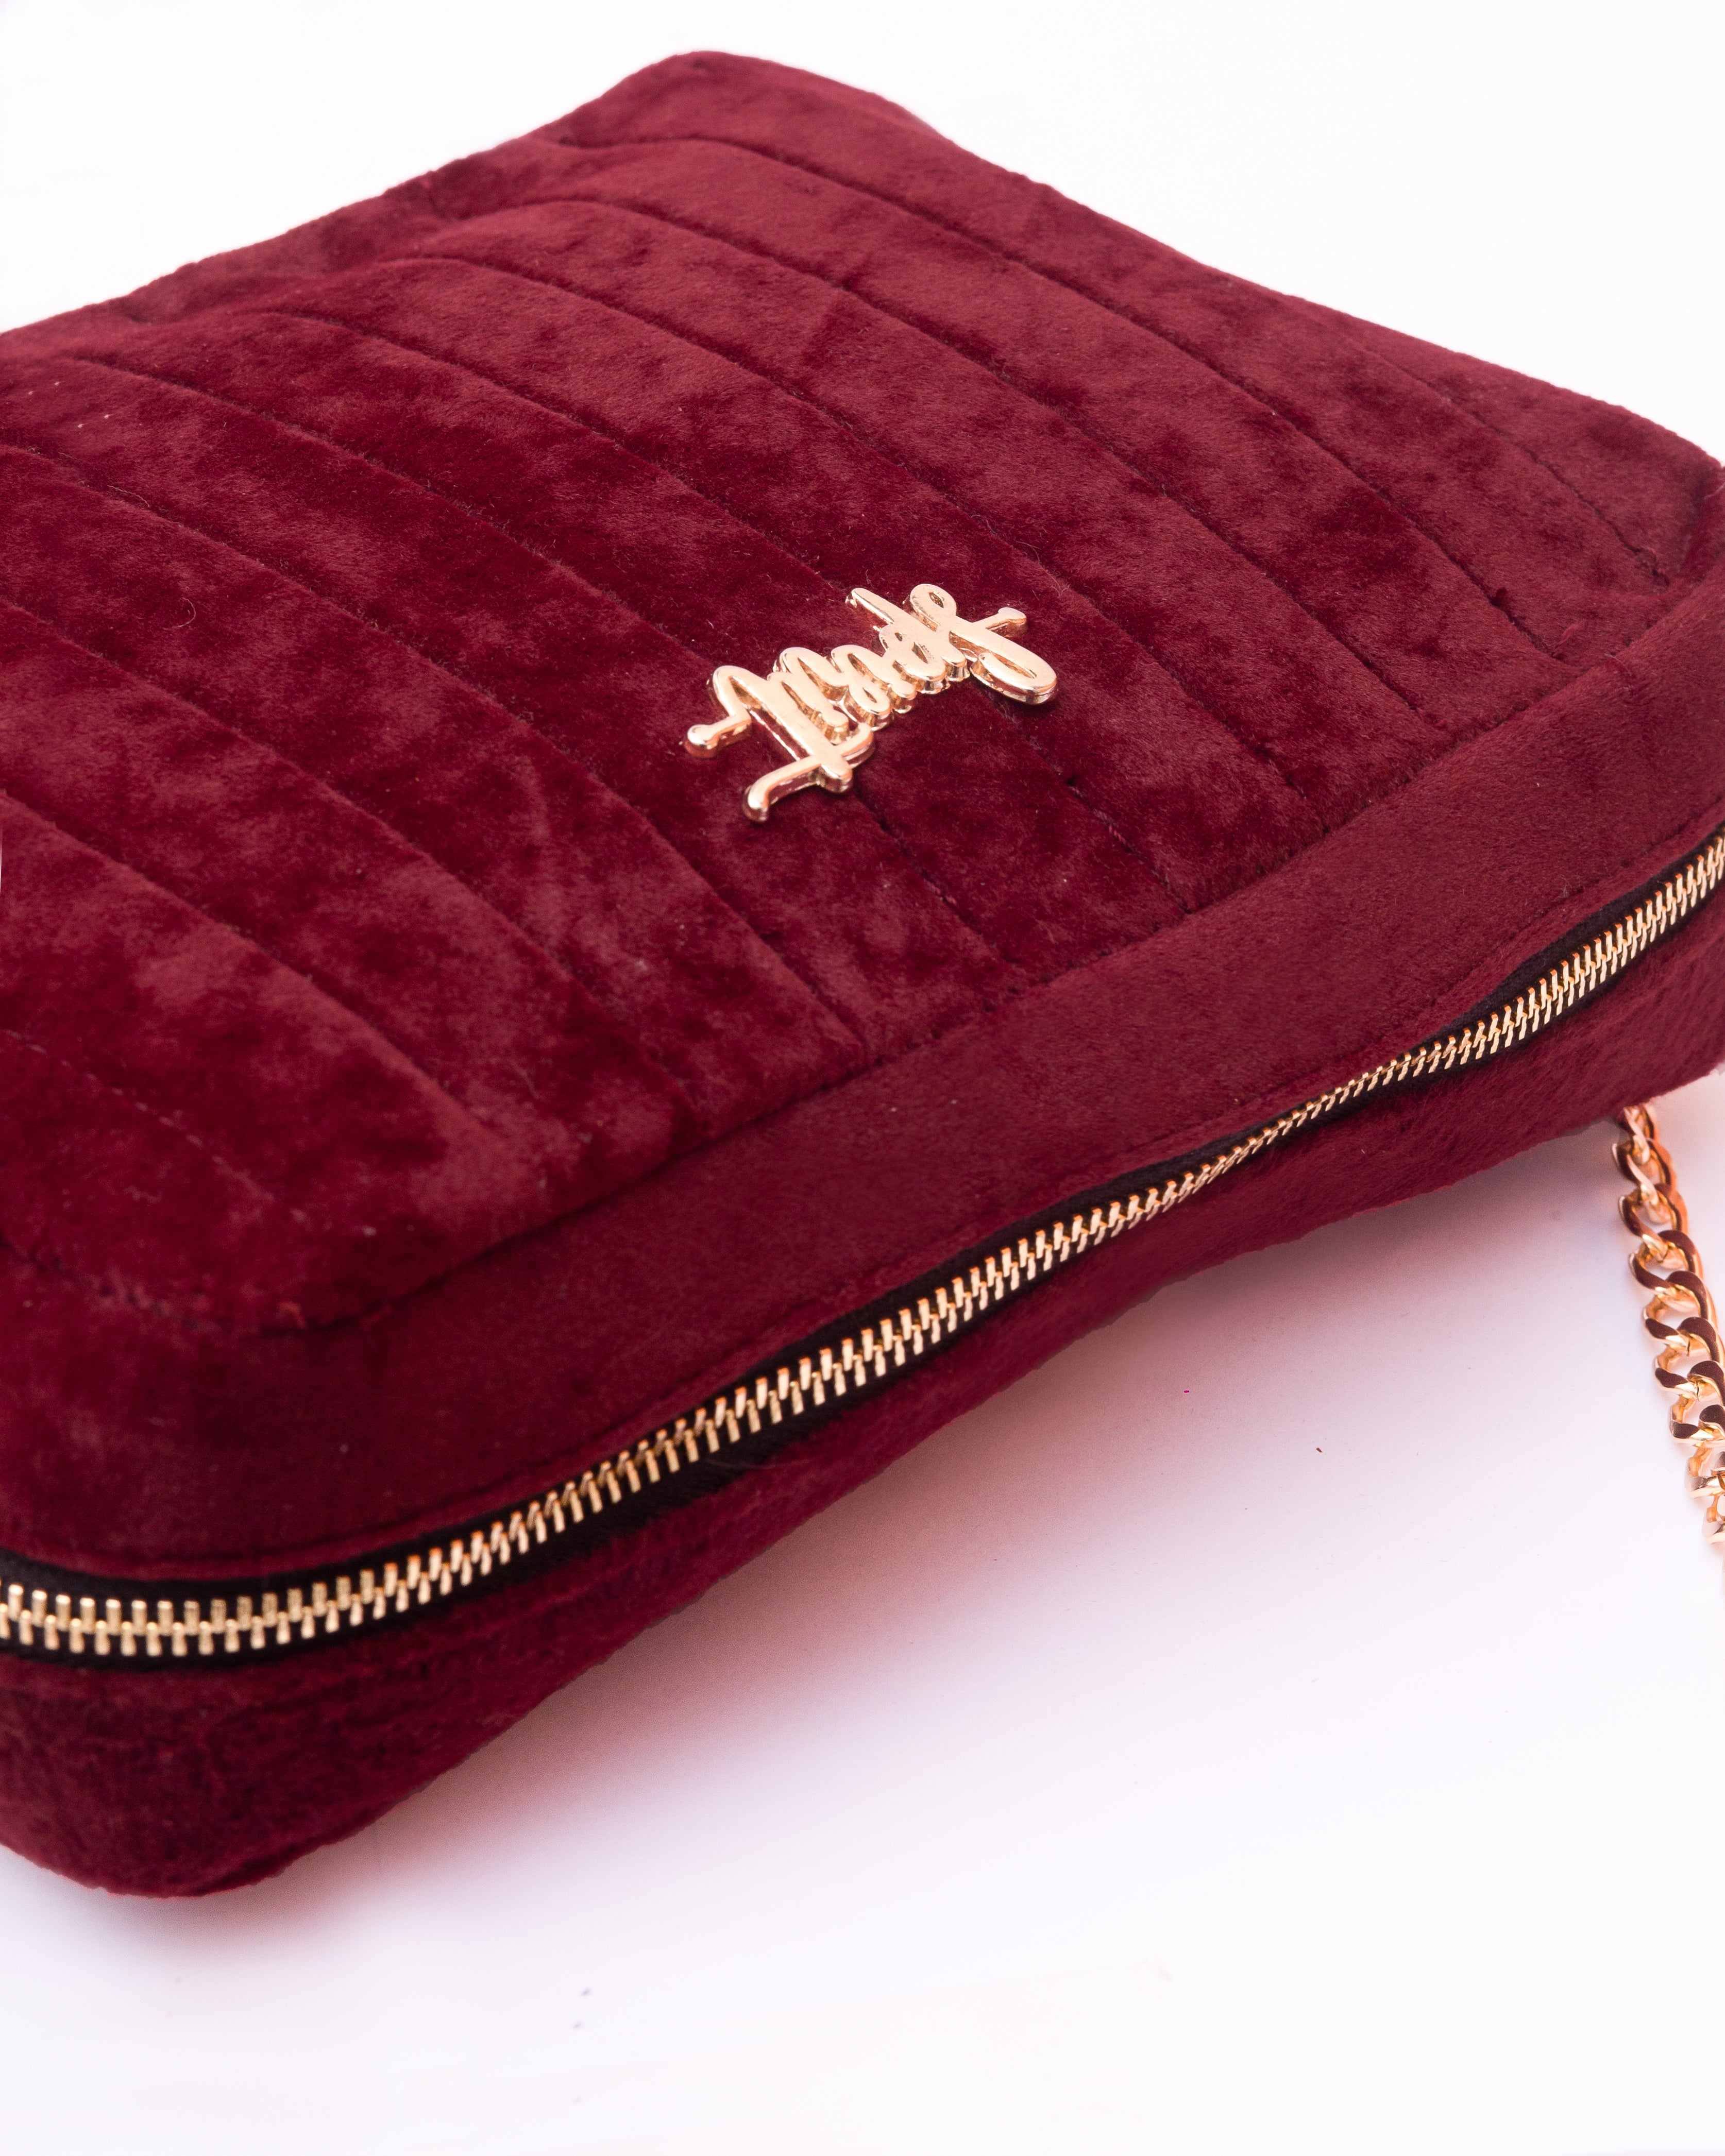 Aria Ring Bag - Burgundy Velvet | Threads by Simply Perfect